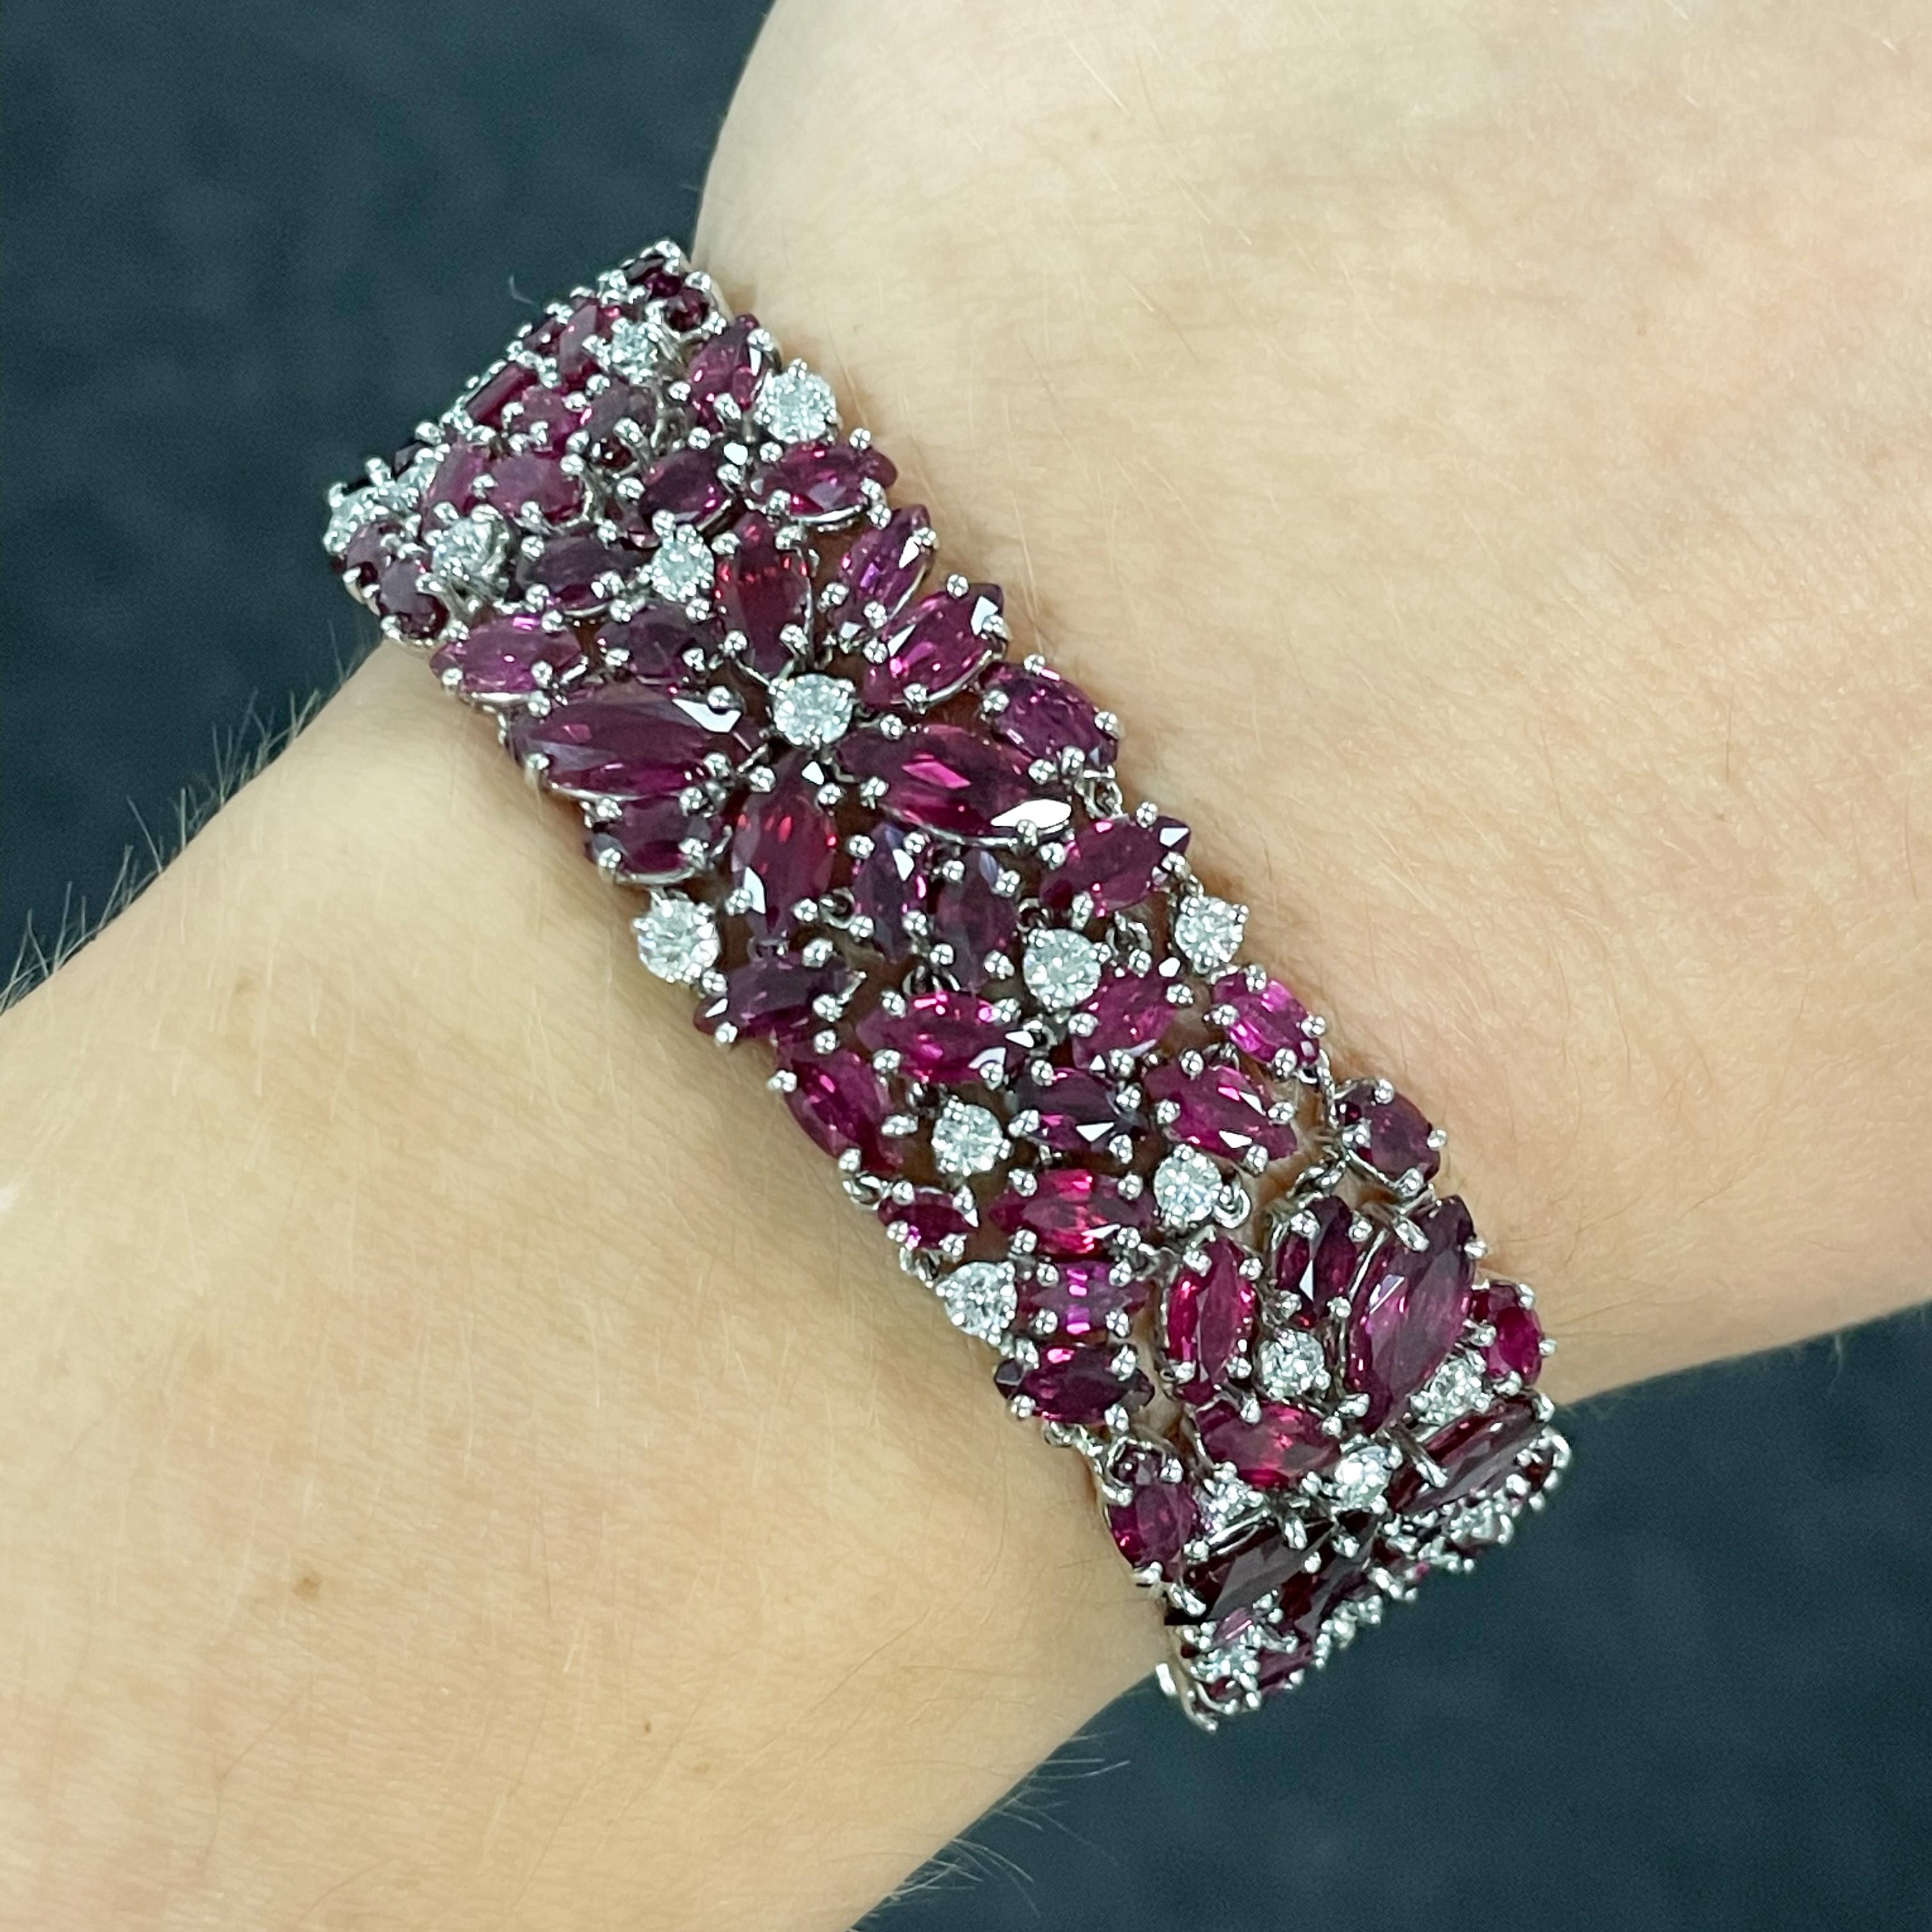 Oscar Heyman platinum bracelet contains 143 marquise rubies (CDC report indicated a mix of Burma and Thai origins) weighing 42.88tcw and 49 round diamonds (F-G/VS quality) weighing 2.92tcw. It is stamped with the makers mark, IRID PLAT, and serial